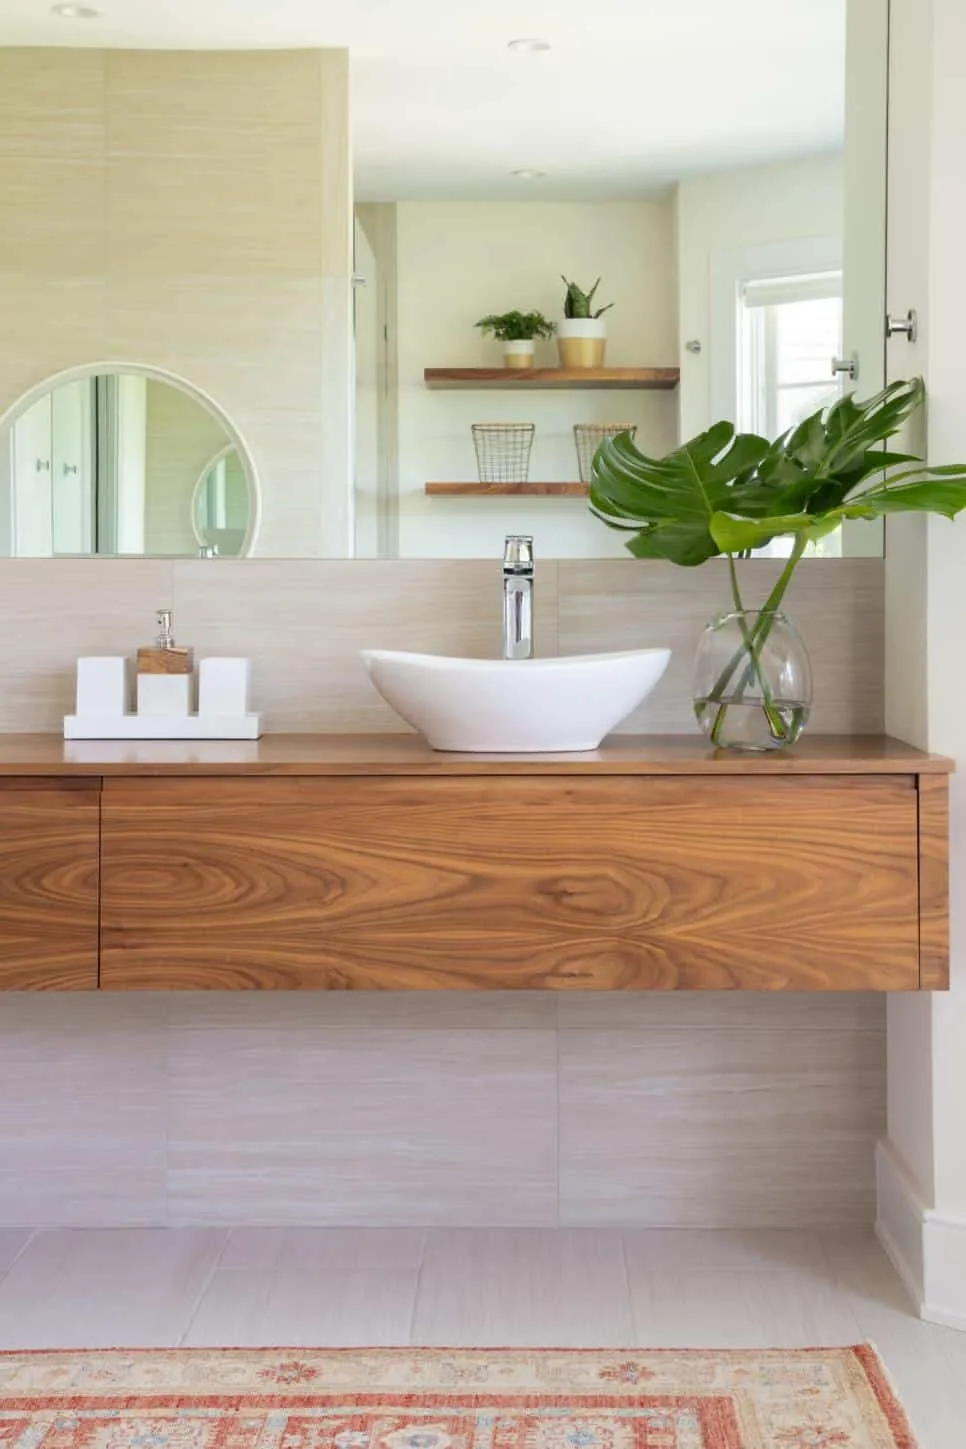 Wall mounted wooden vanity with ceramic bowl sink